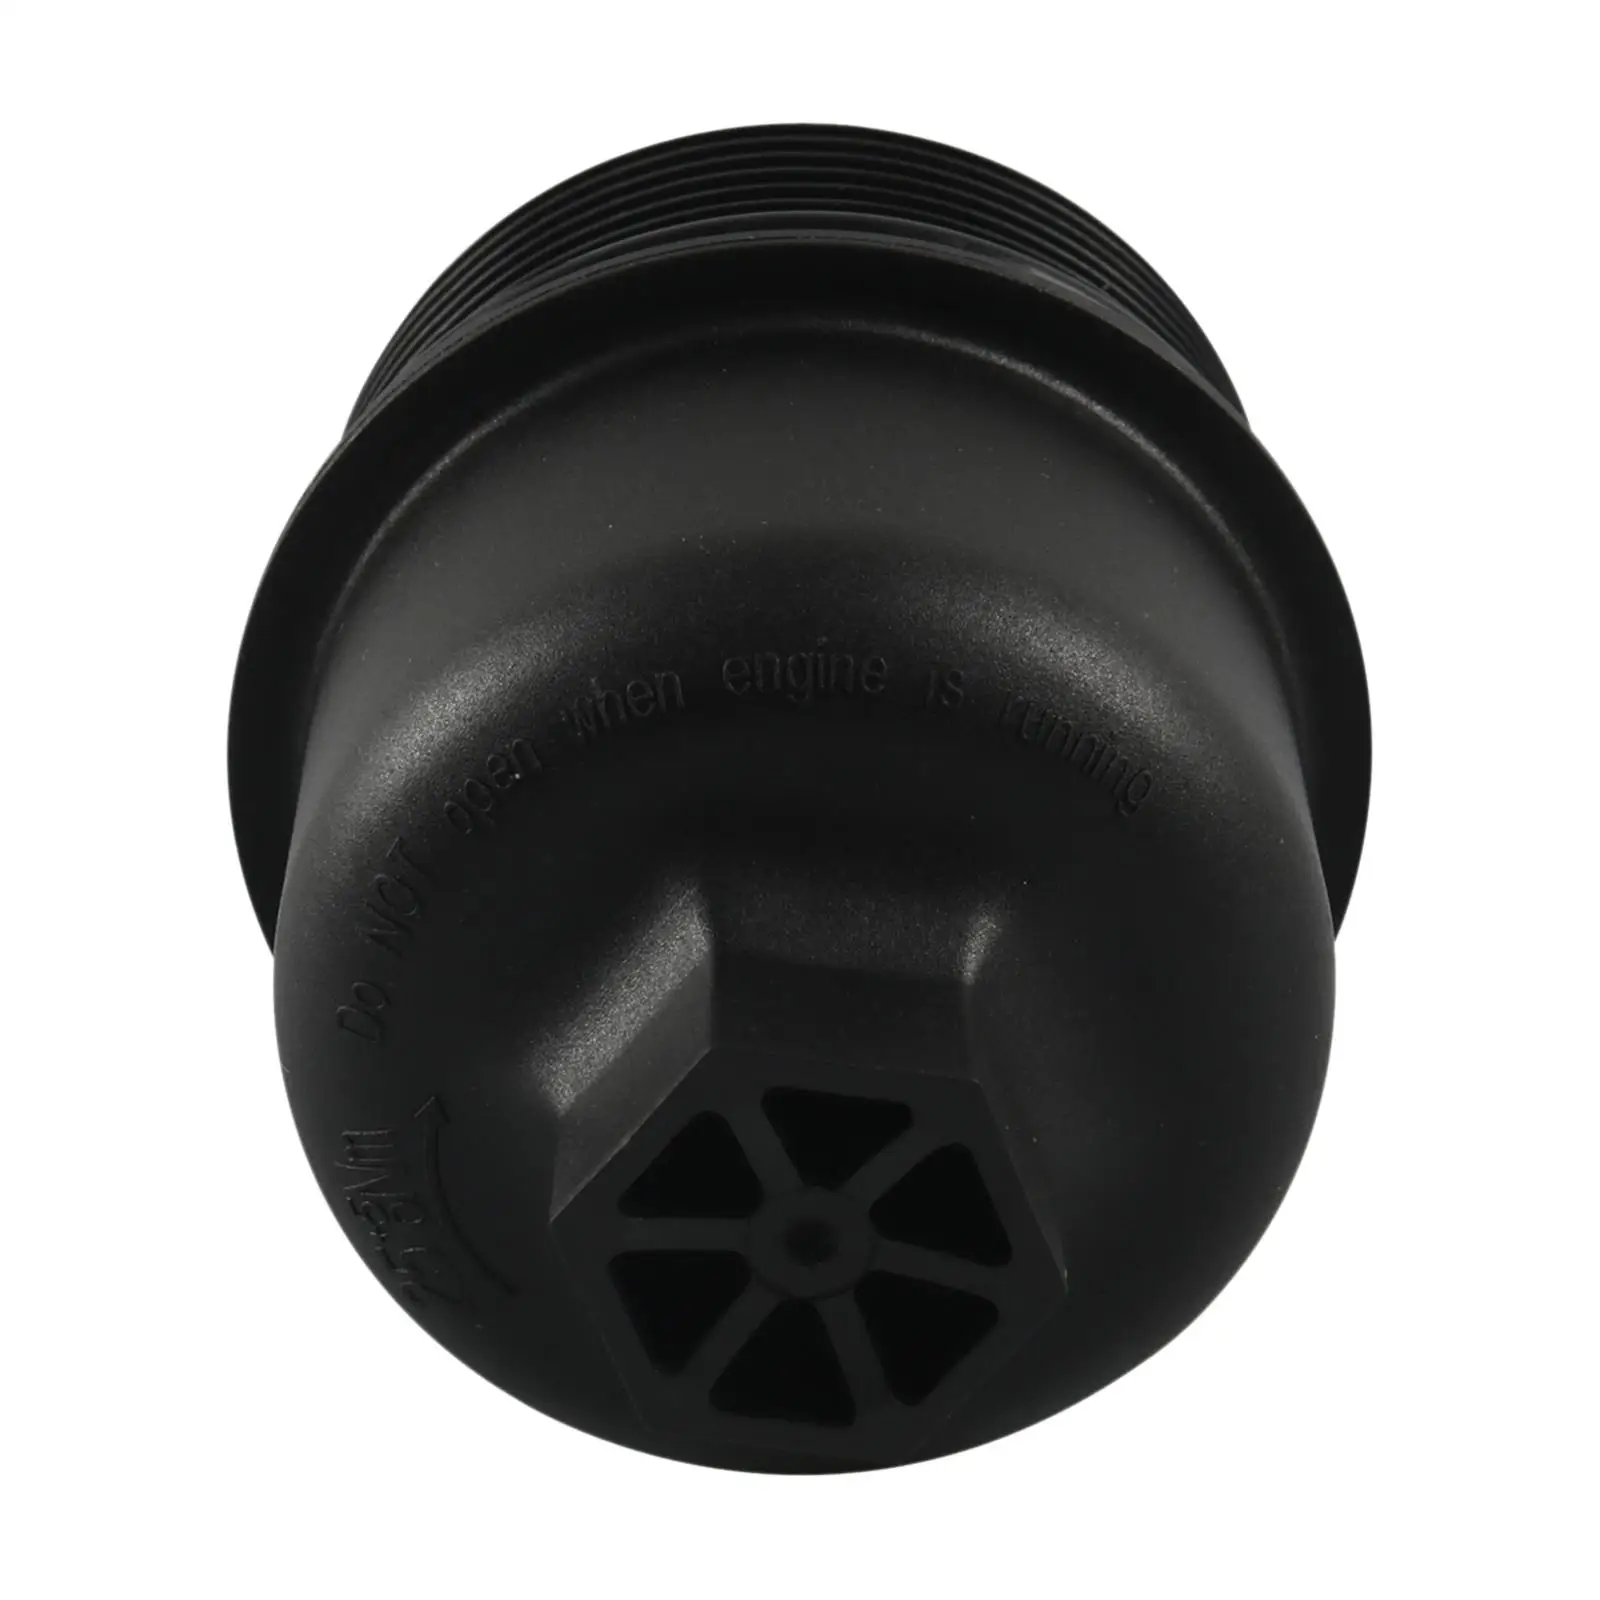 Oil Filter Housing Cap Cover 917-190 for Charger Replacement Durable